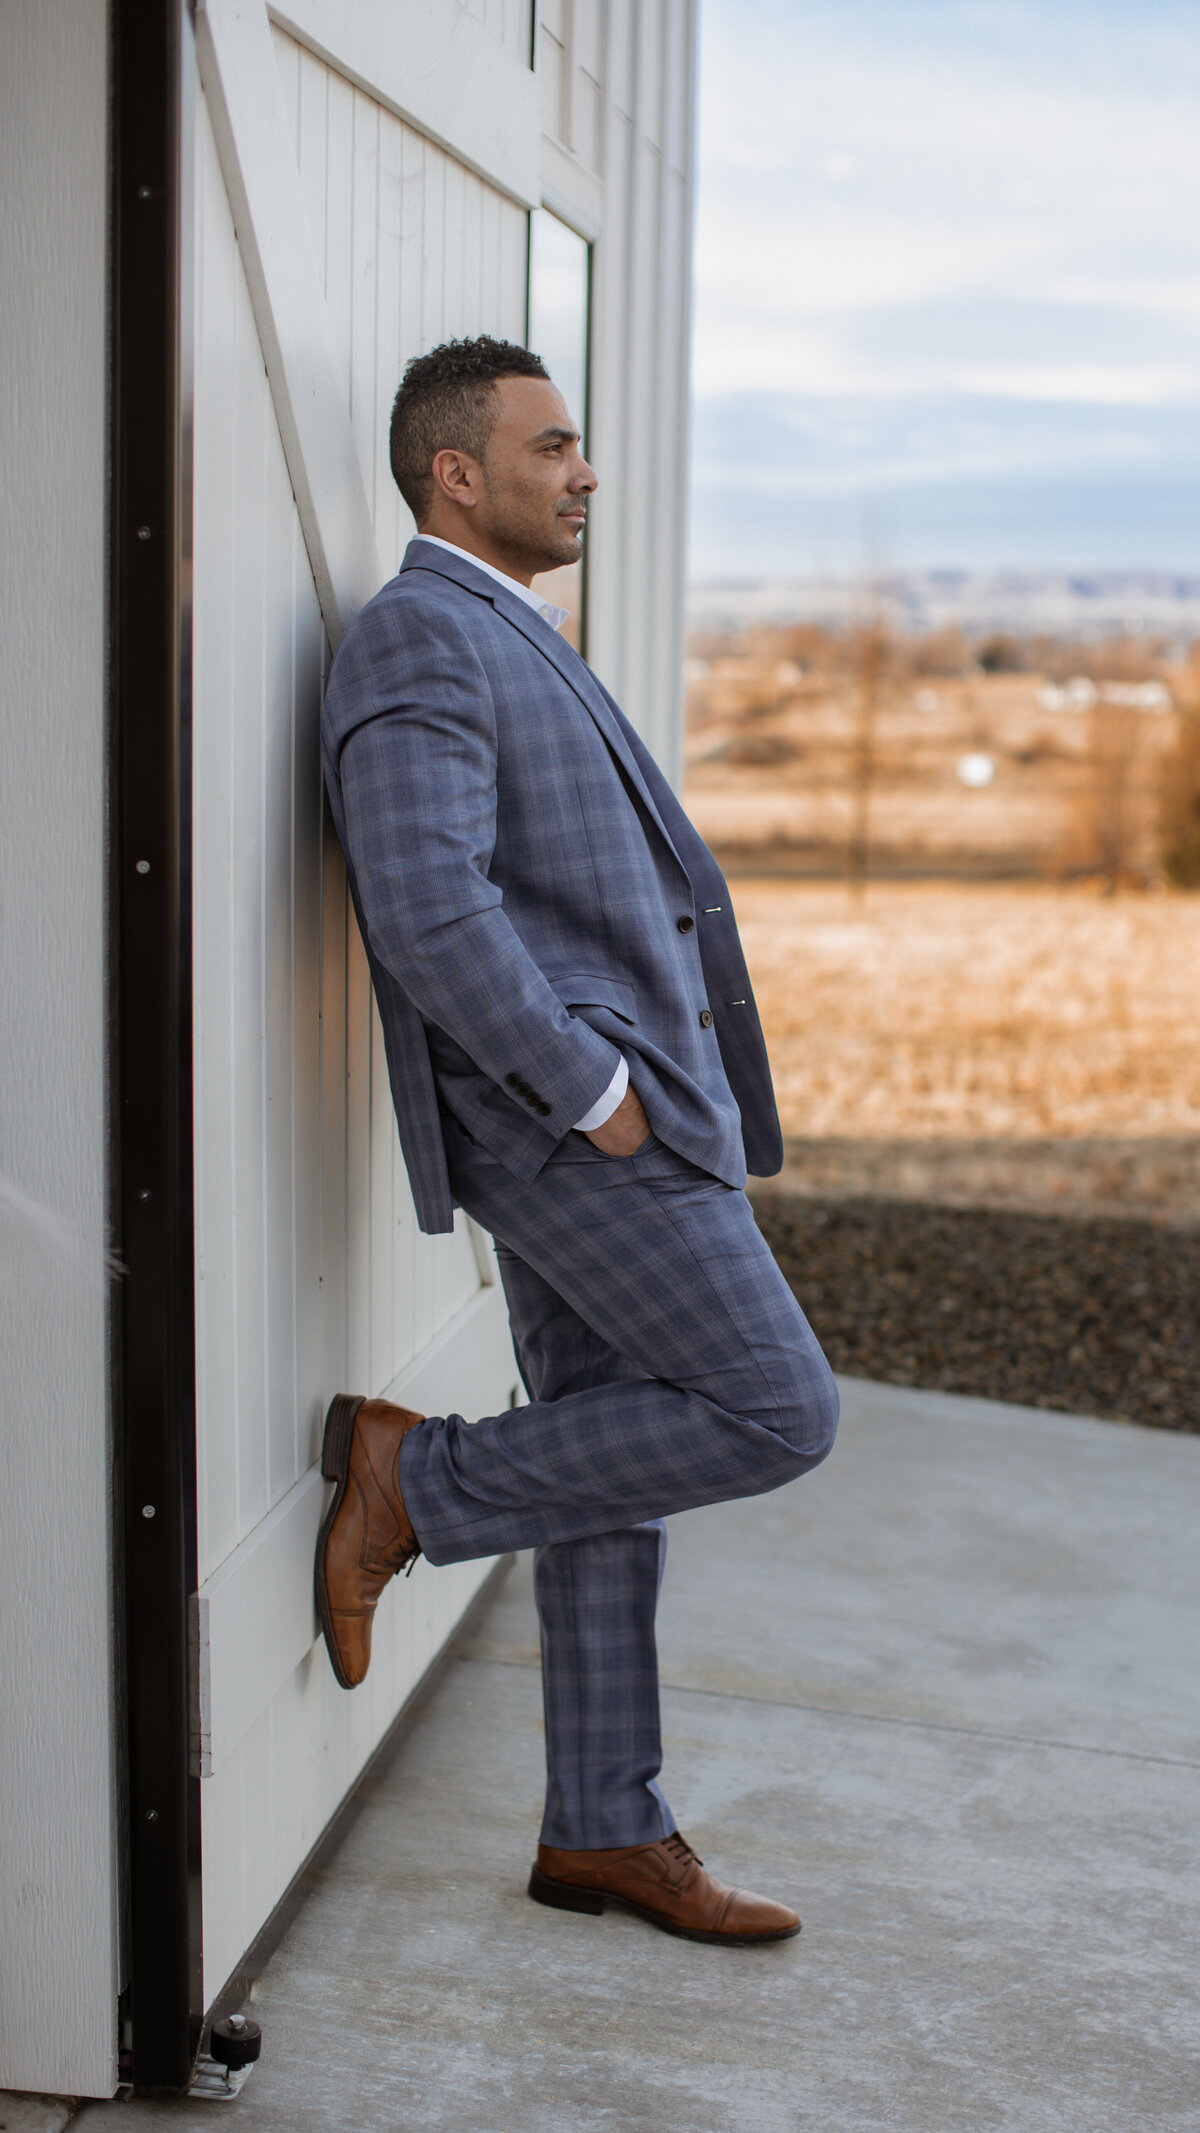 Checkered Suit Brown Shoes vaguely middle eastern man leaning against White Barn